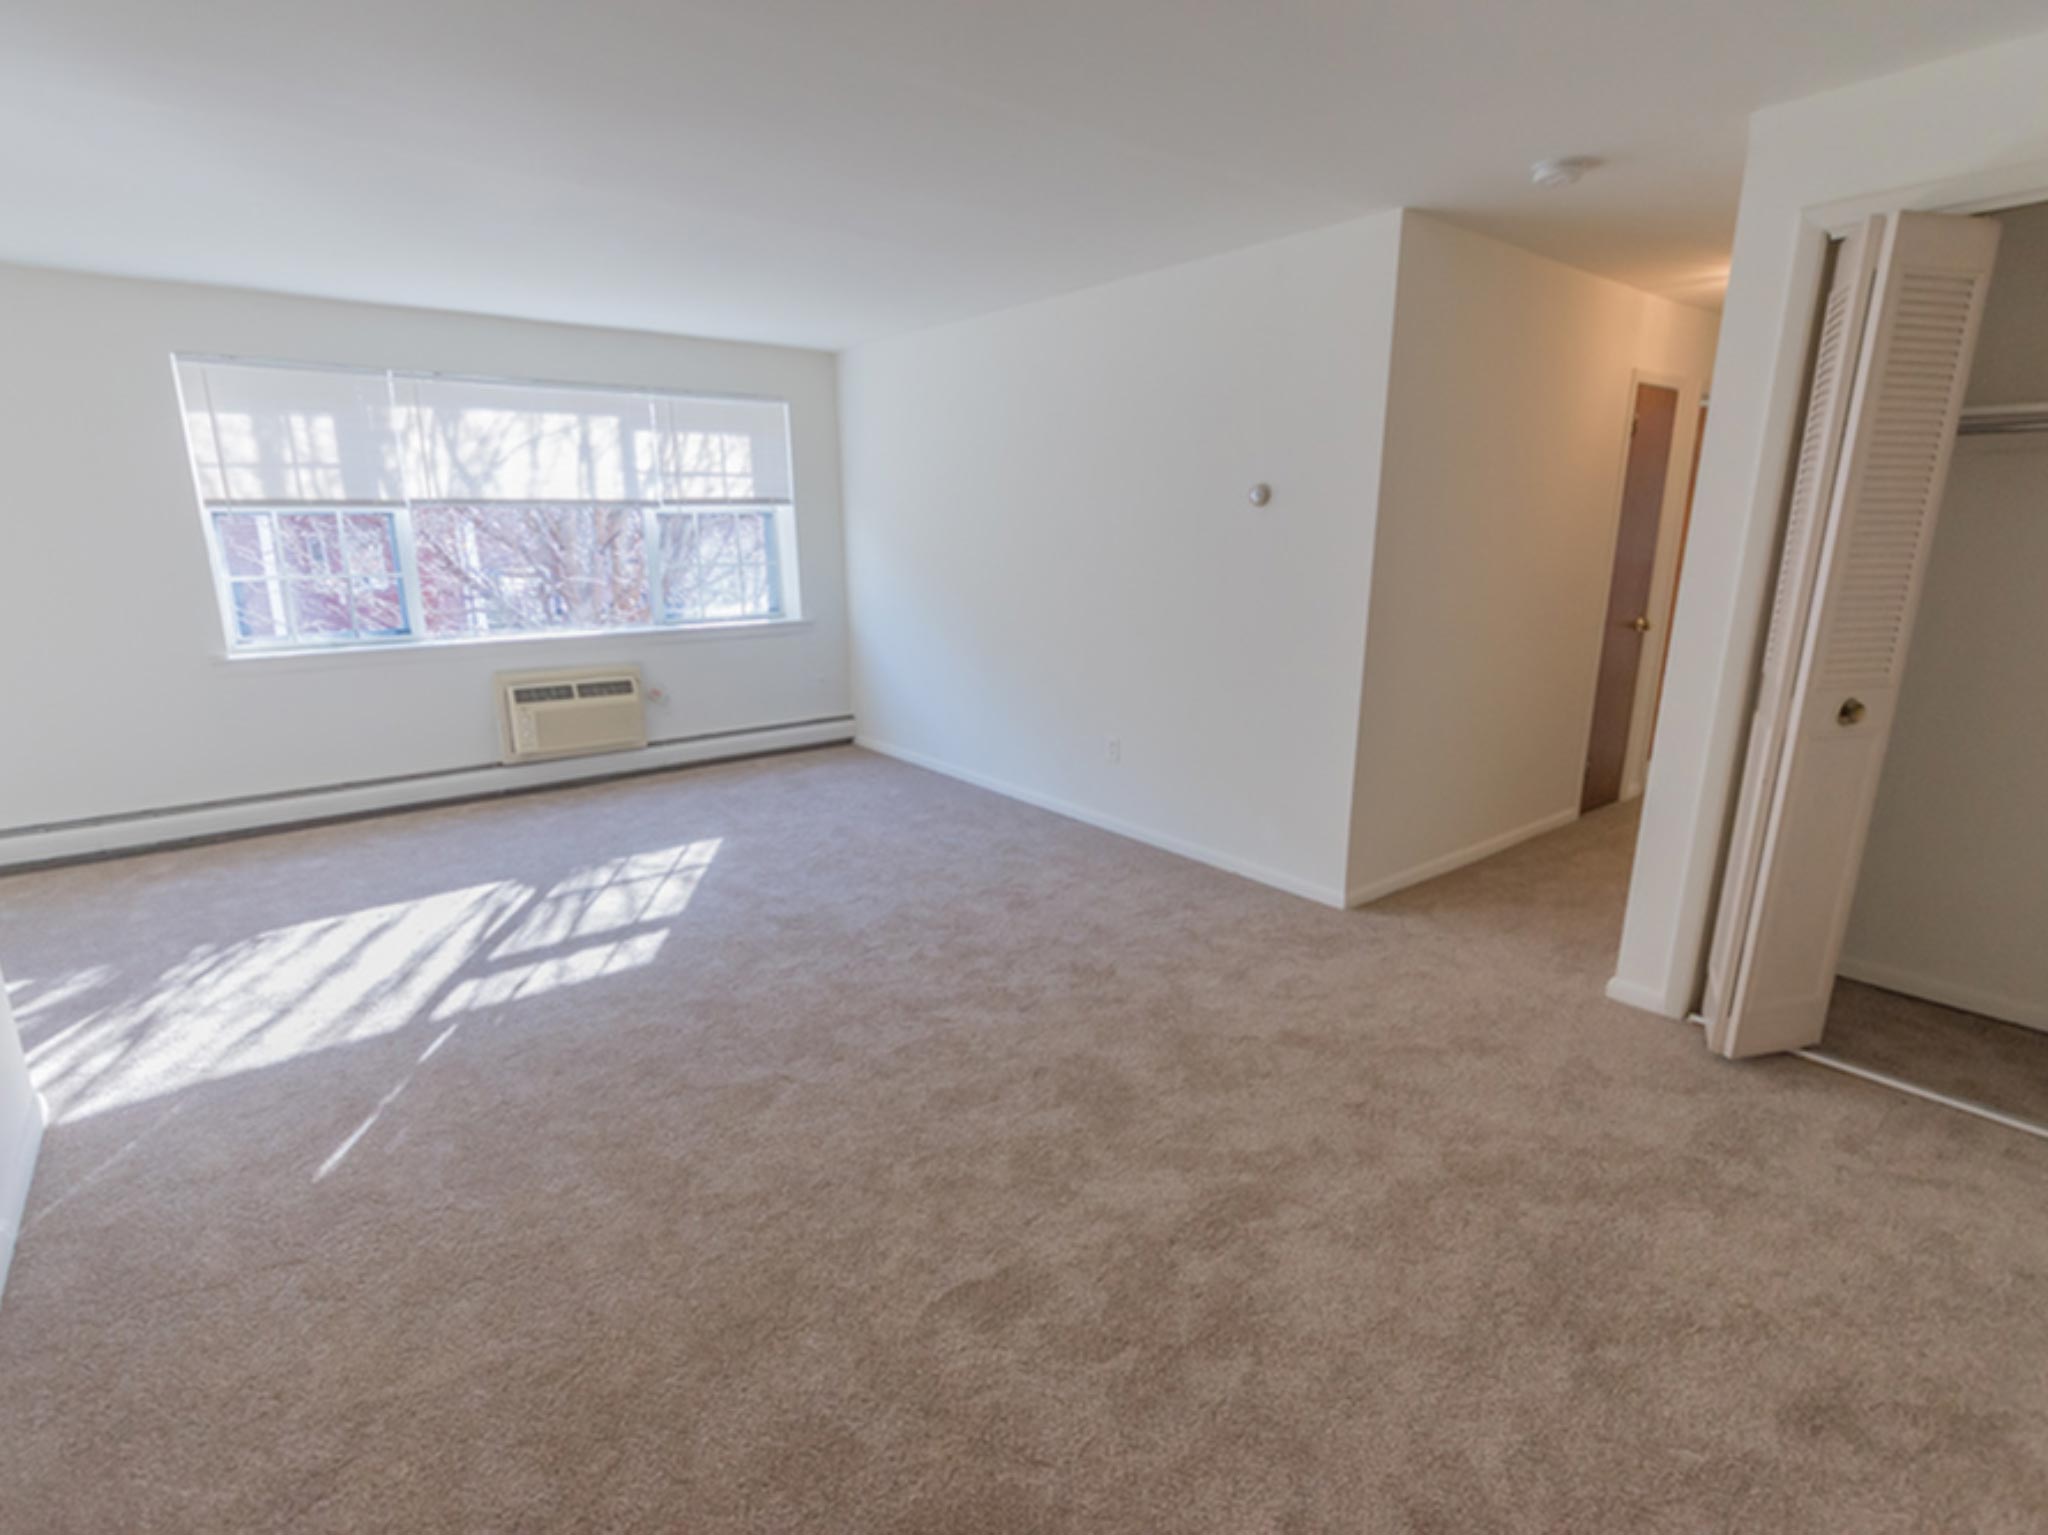 Spacious living area with a large window and a coat closet.